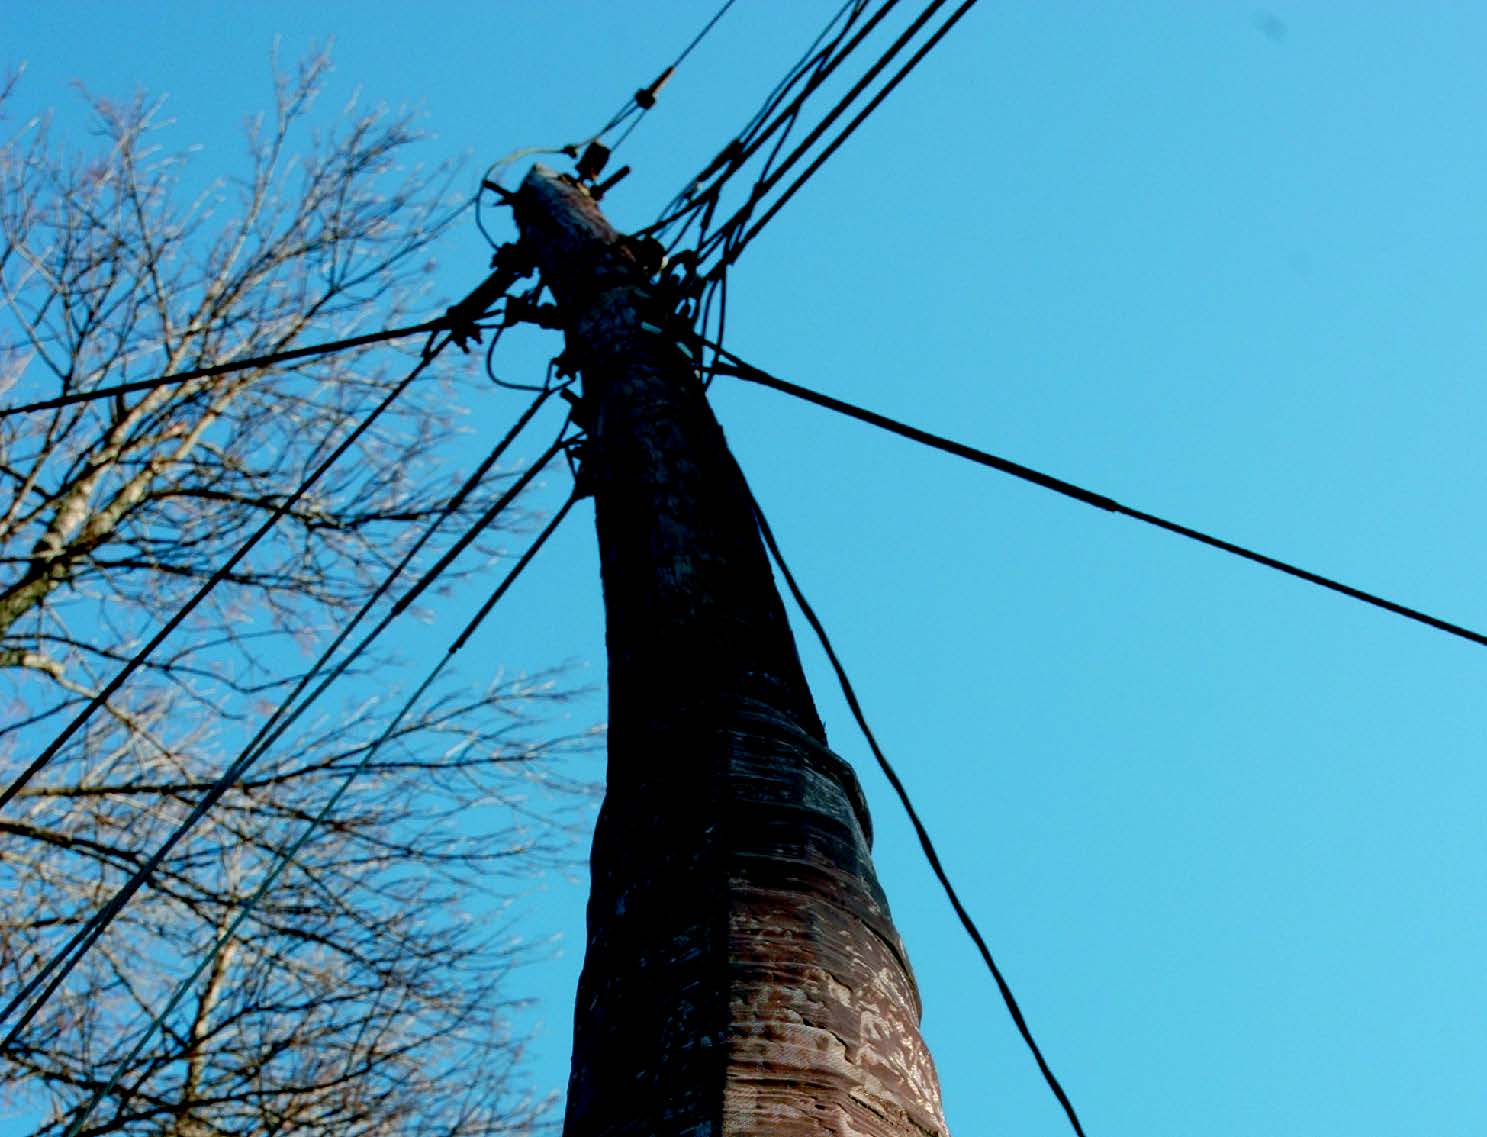 An in-service wood utility pole showing visible signs of compromised integrity